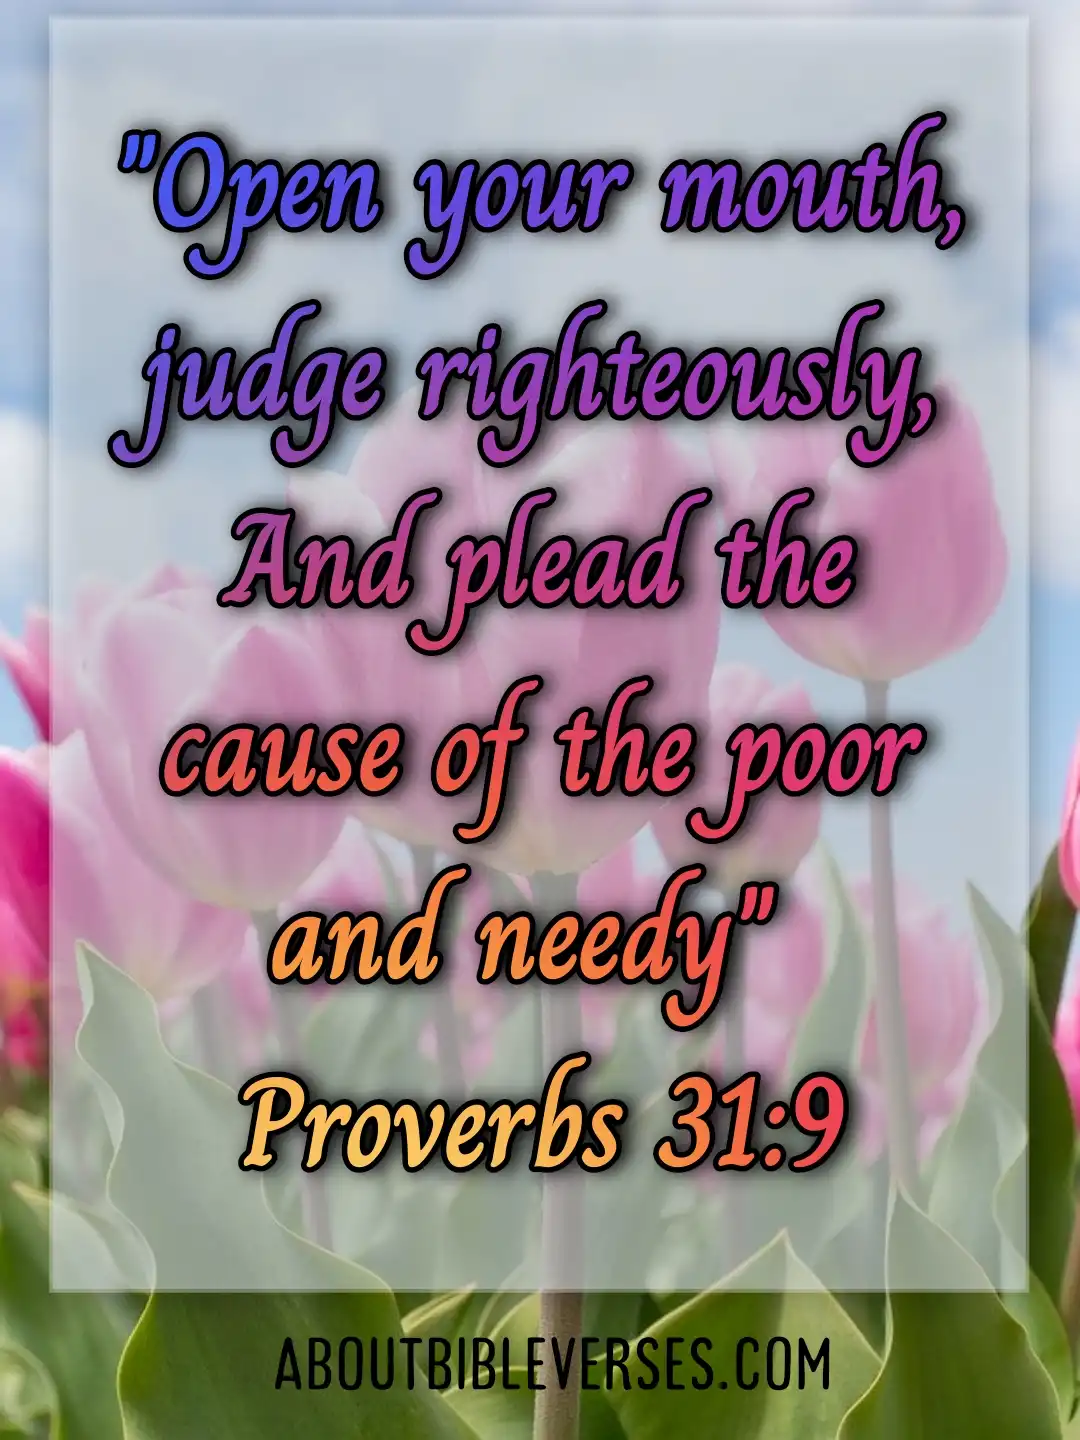 bible verses about judging (Proverbs 31:9)